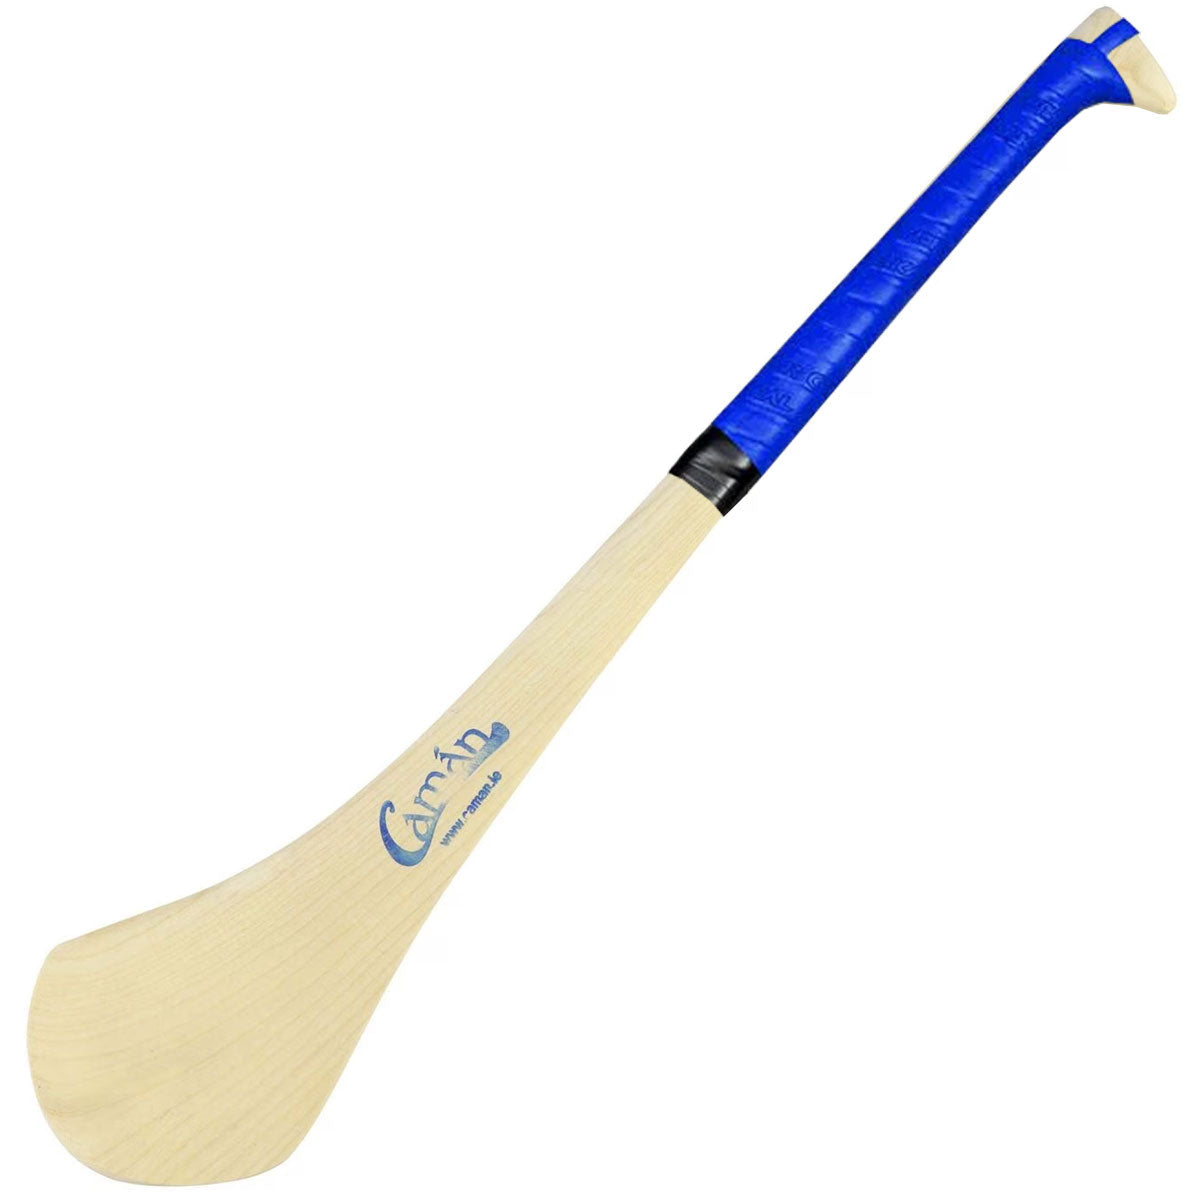 Caman Hurling Stick size 36 (Inches)